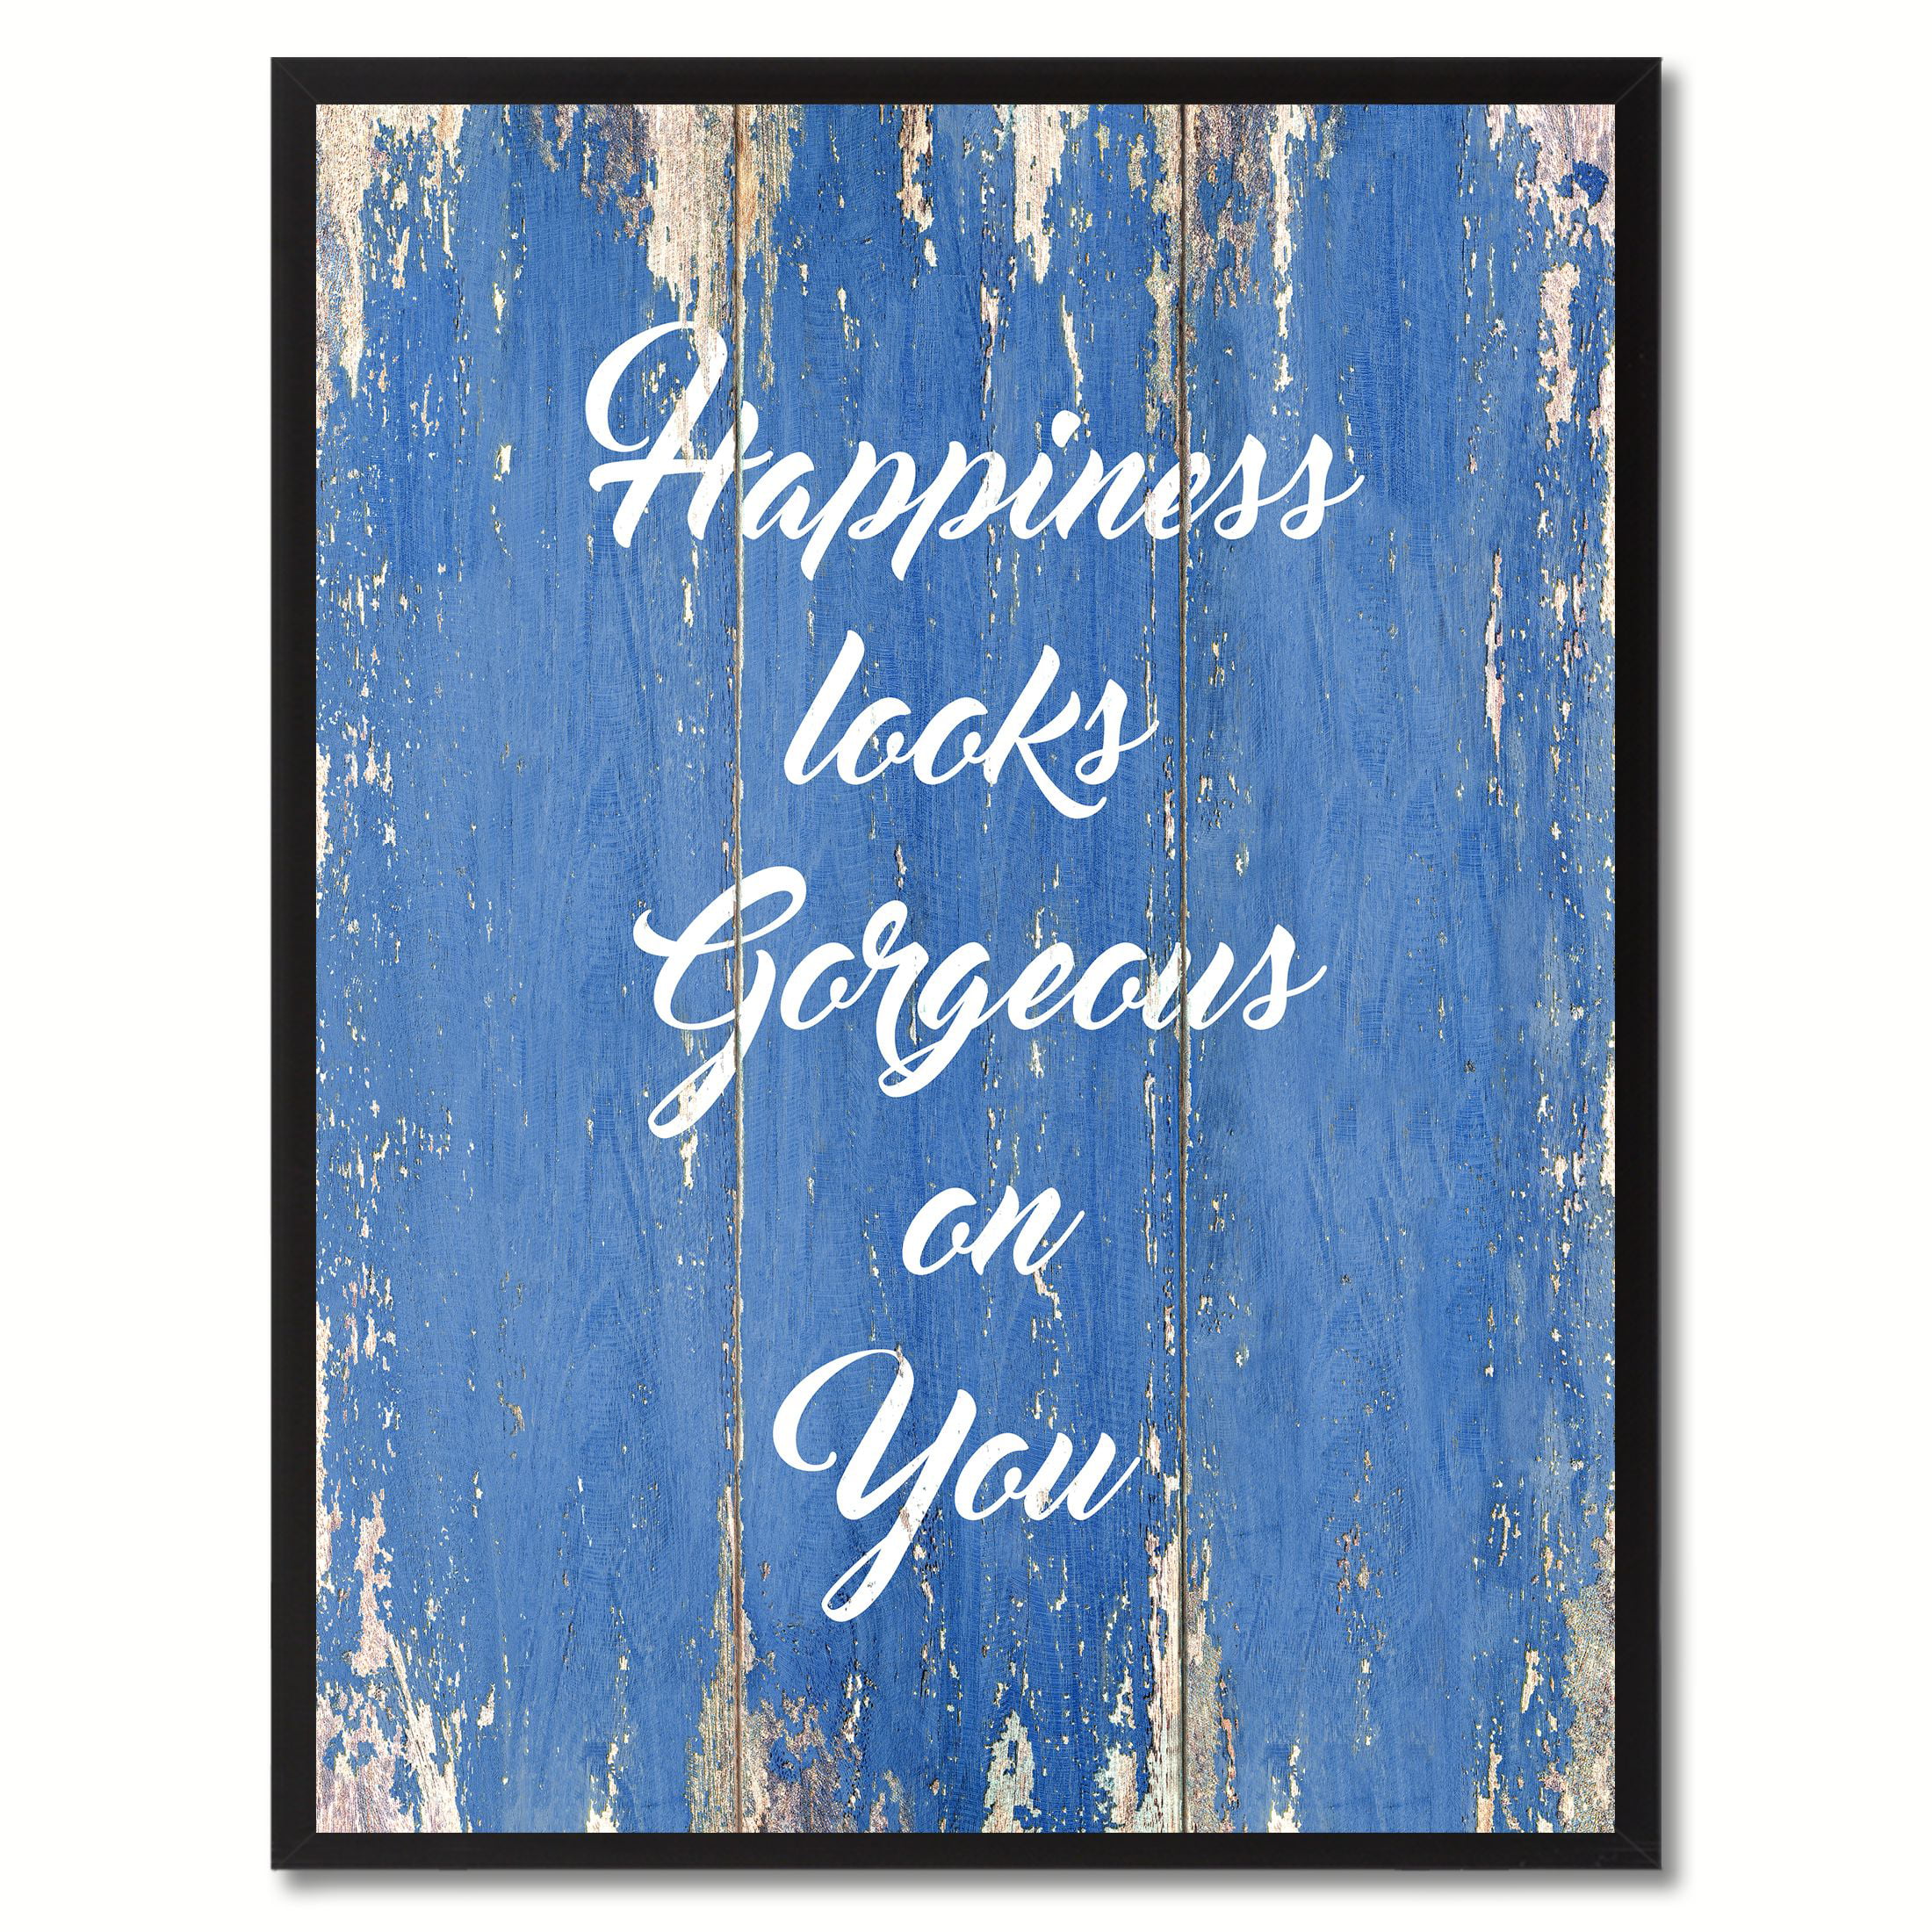 Happiness Looks Gorgeous On You Framed Canvas Blue Quote Office Wall Art Print 